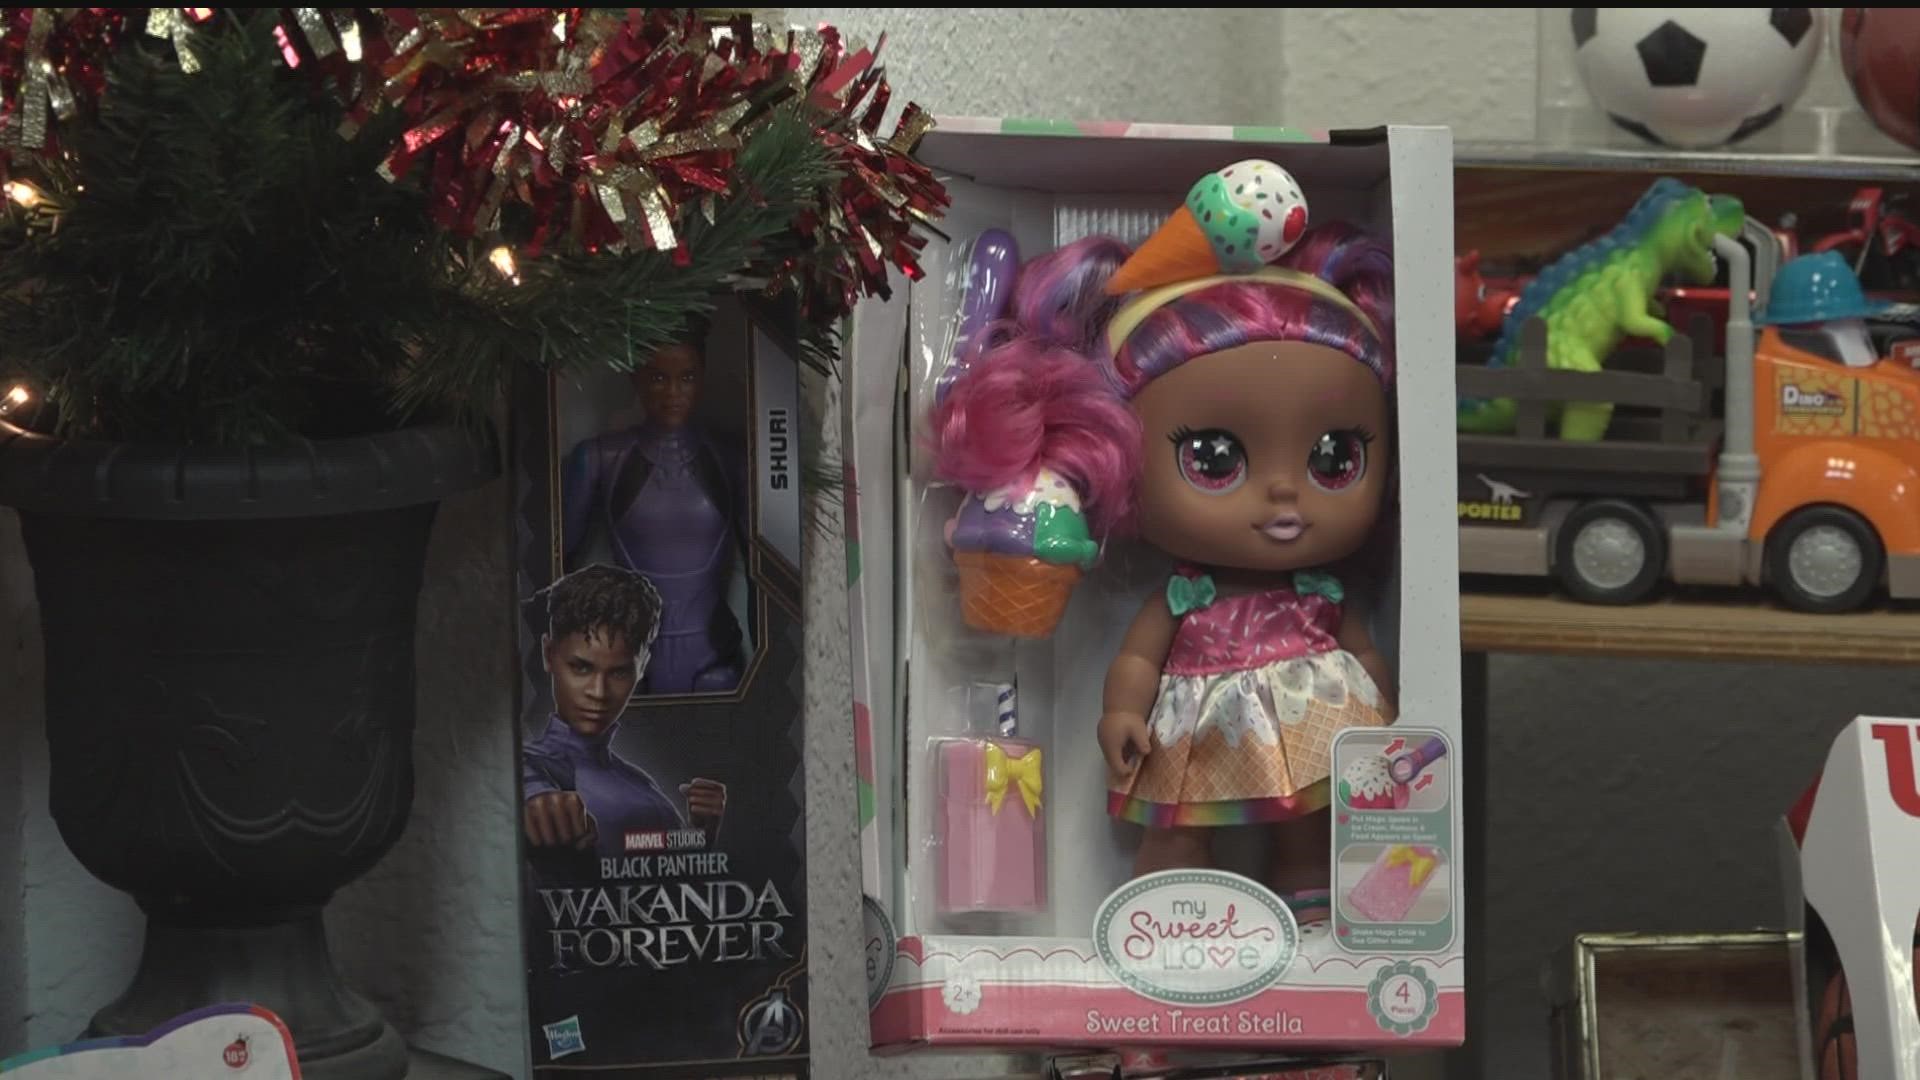 Members at Greater Mount Vernon Church wanted to focus on collecting culturally diverse toys that give children a chance to see themselves.